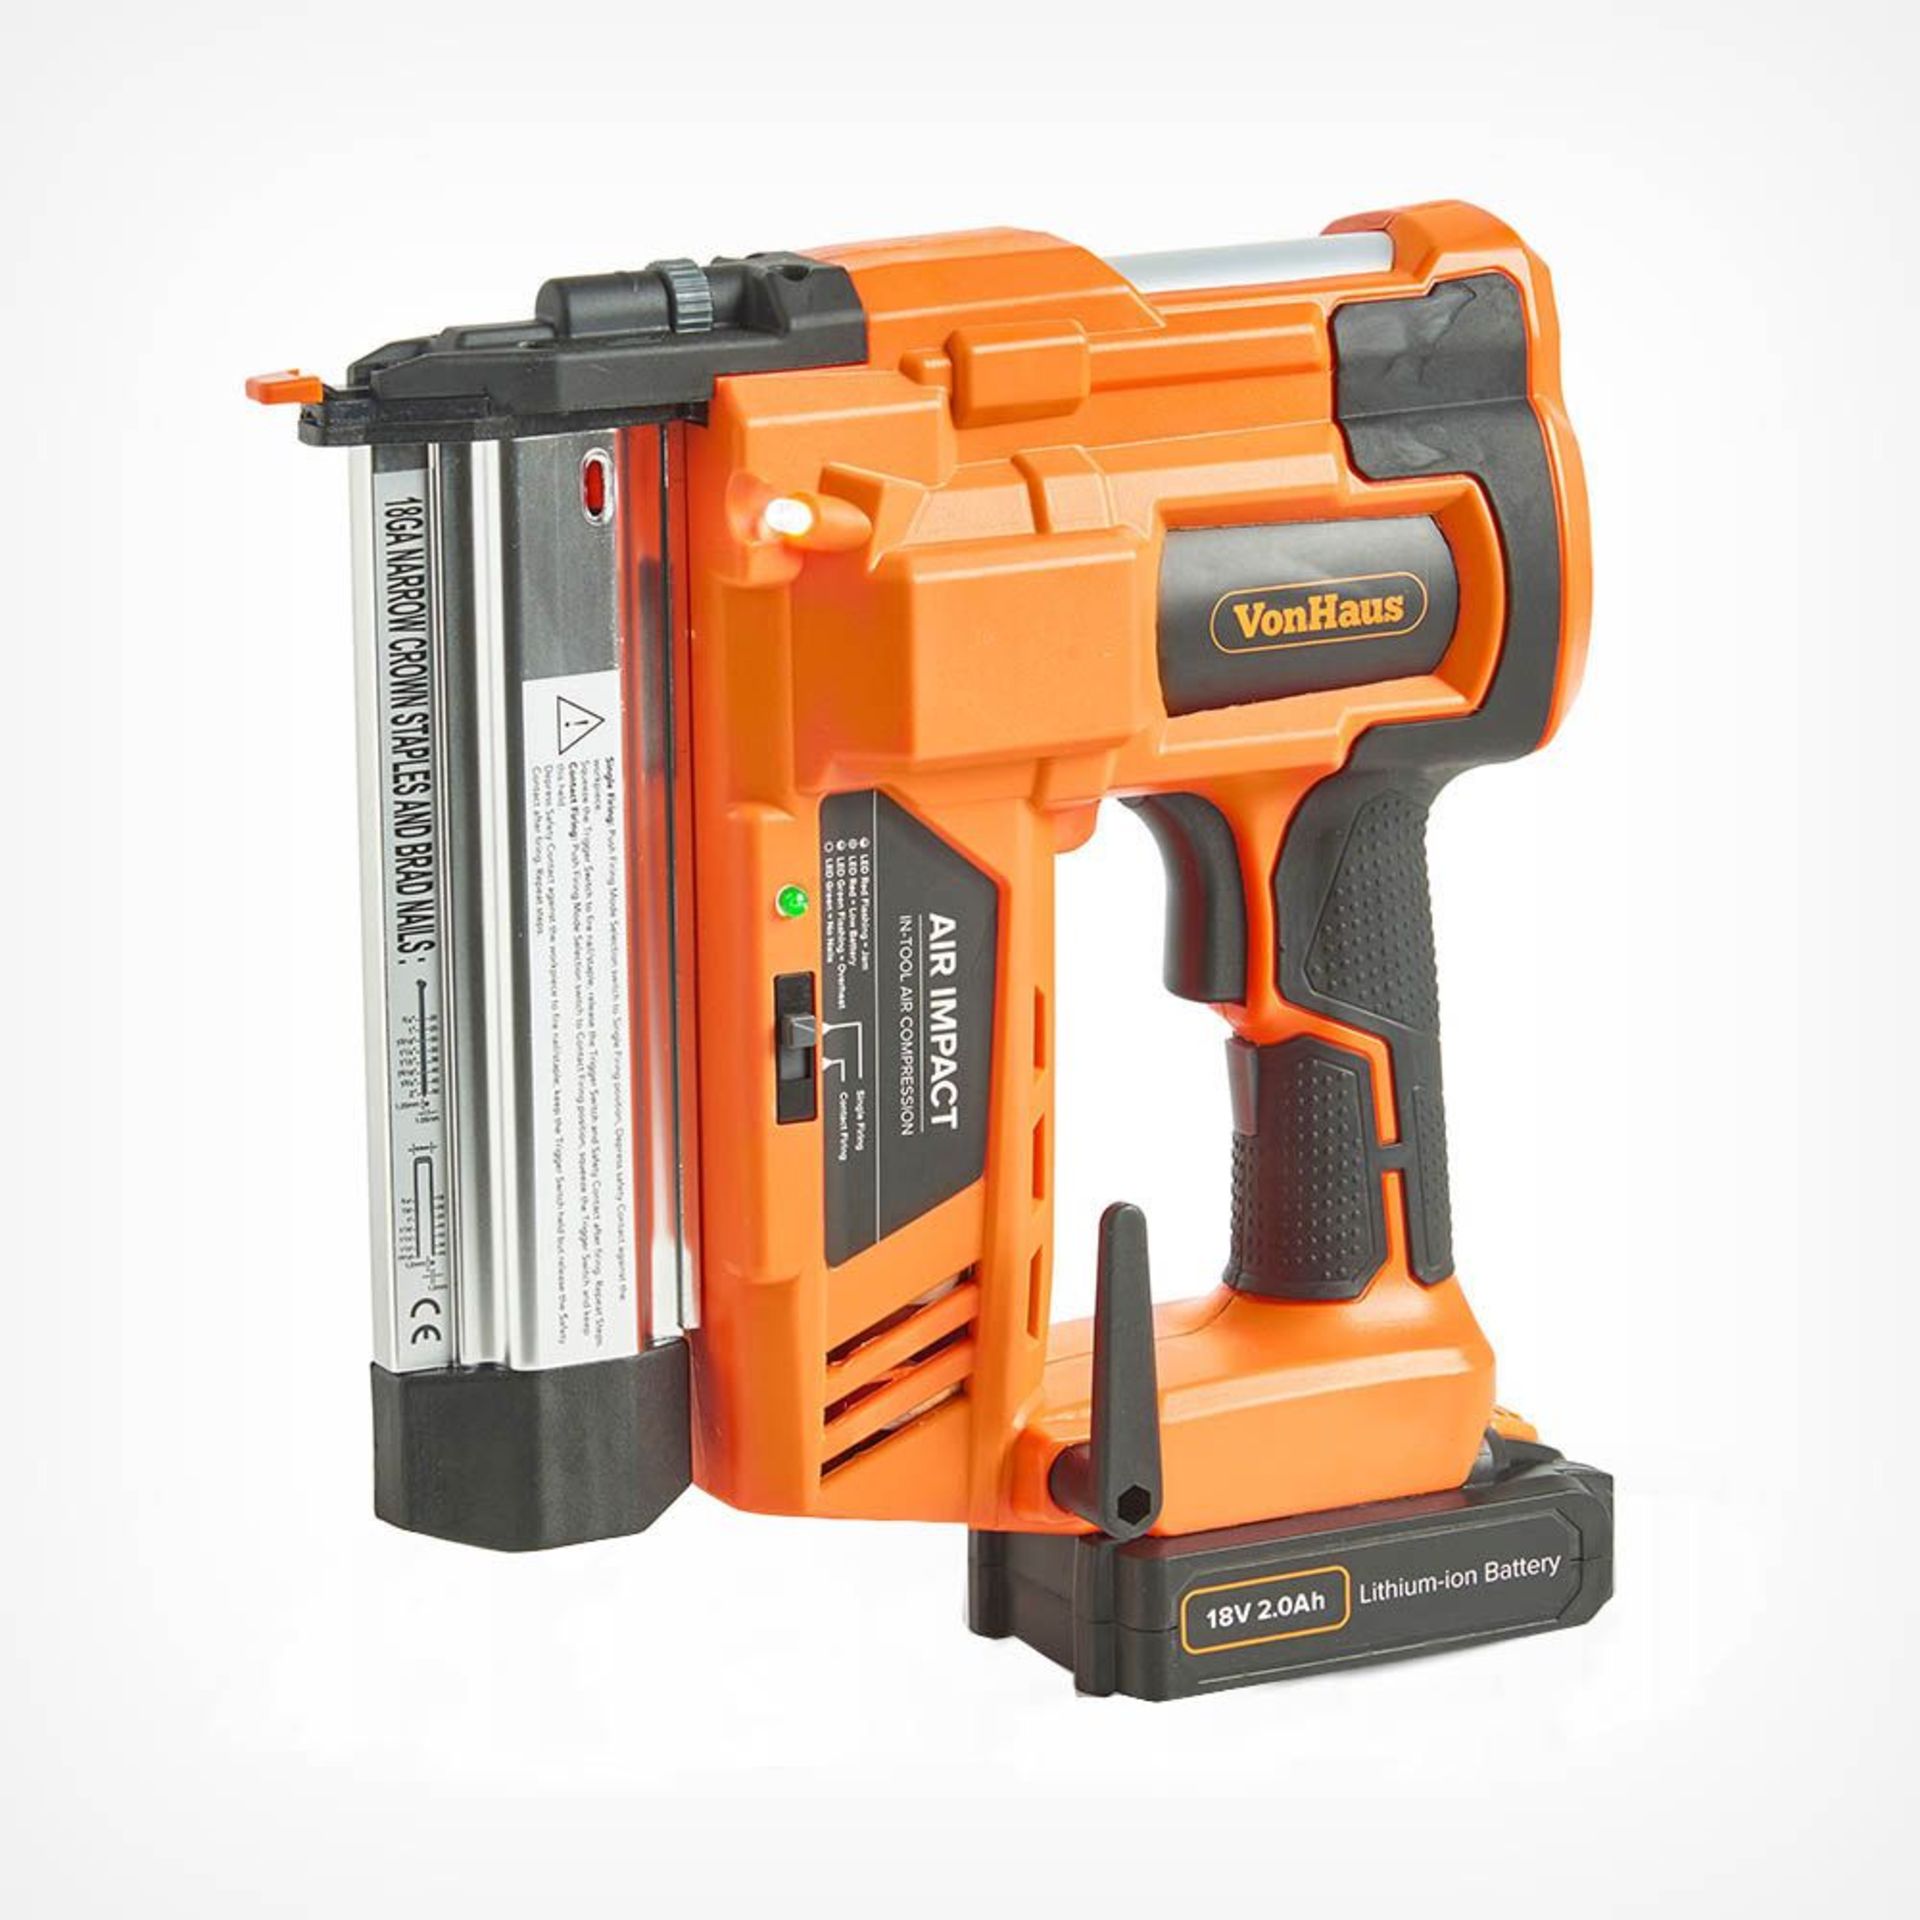 Cordless Nail Gun and Staple Gun. - BI. Ideal for a range of materials and applications including